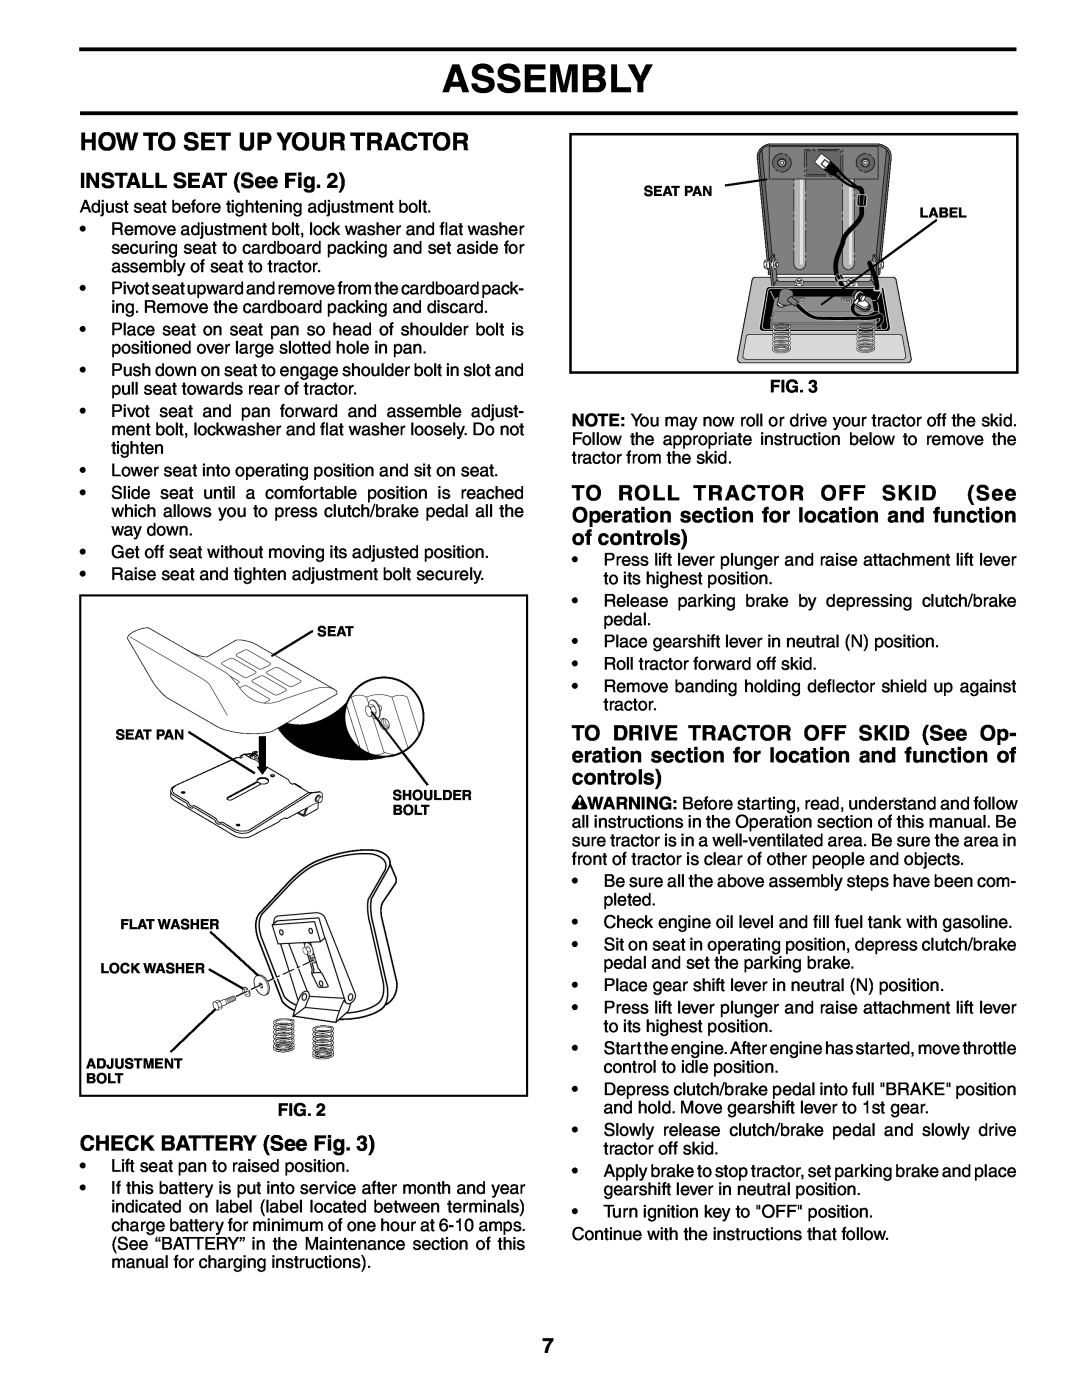 Poulan 186888, 954570932 manual How To Set Up Your Tractor, INSTALL SEAT See Fig, CHECK BATTERY See Fig, Assembly 